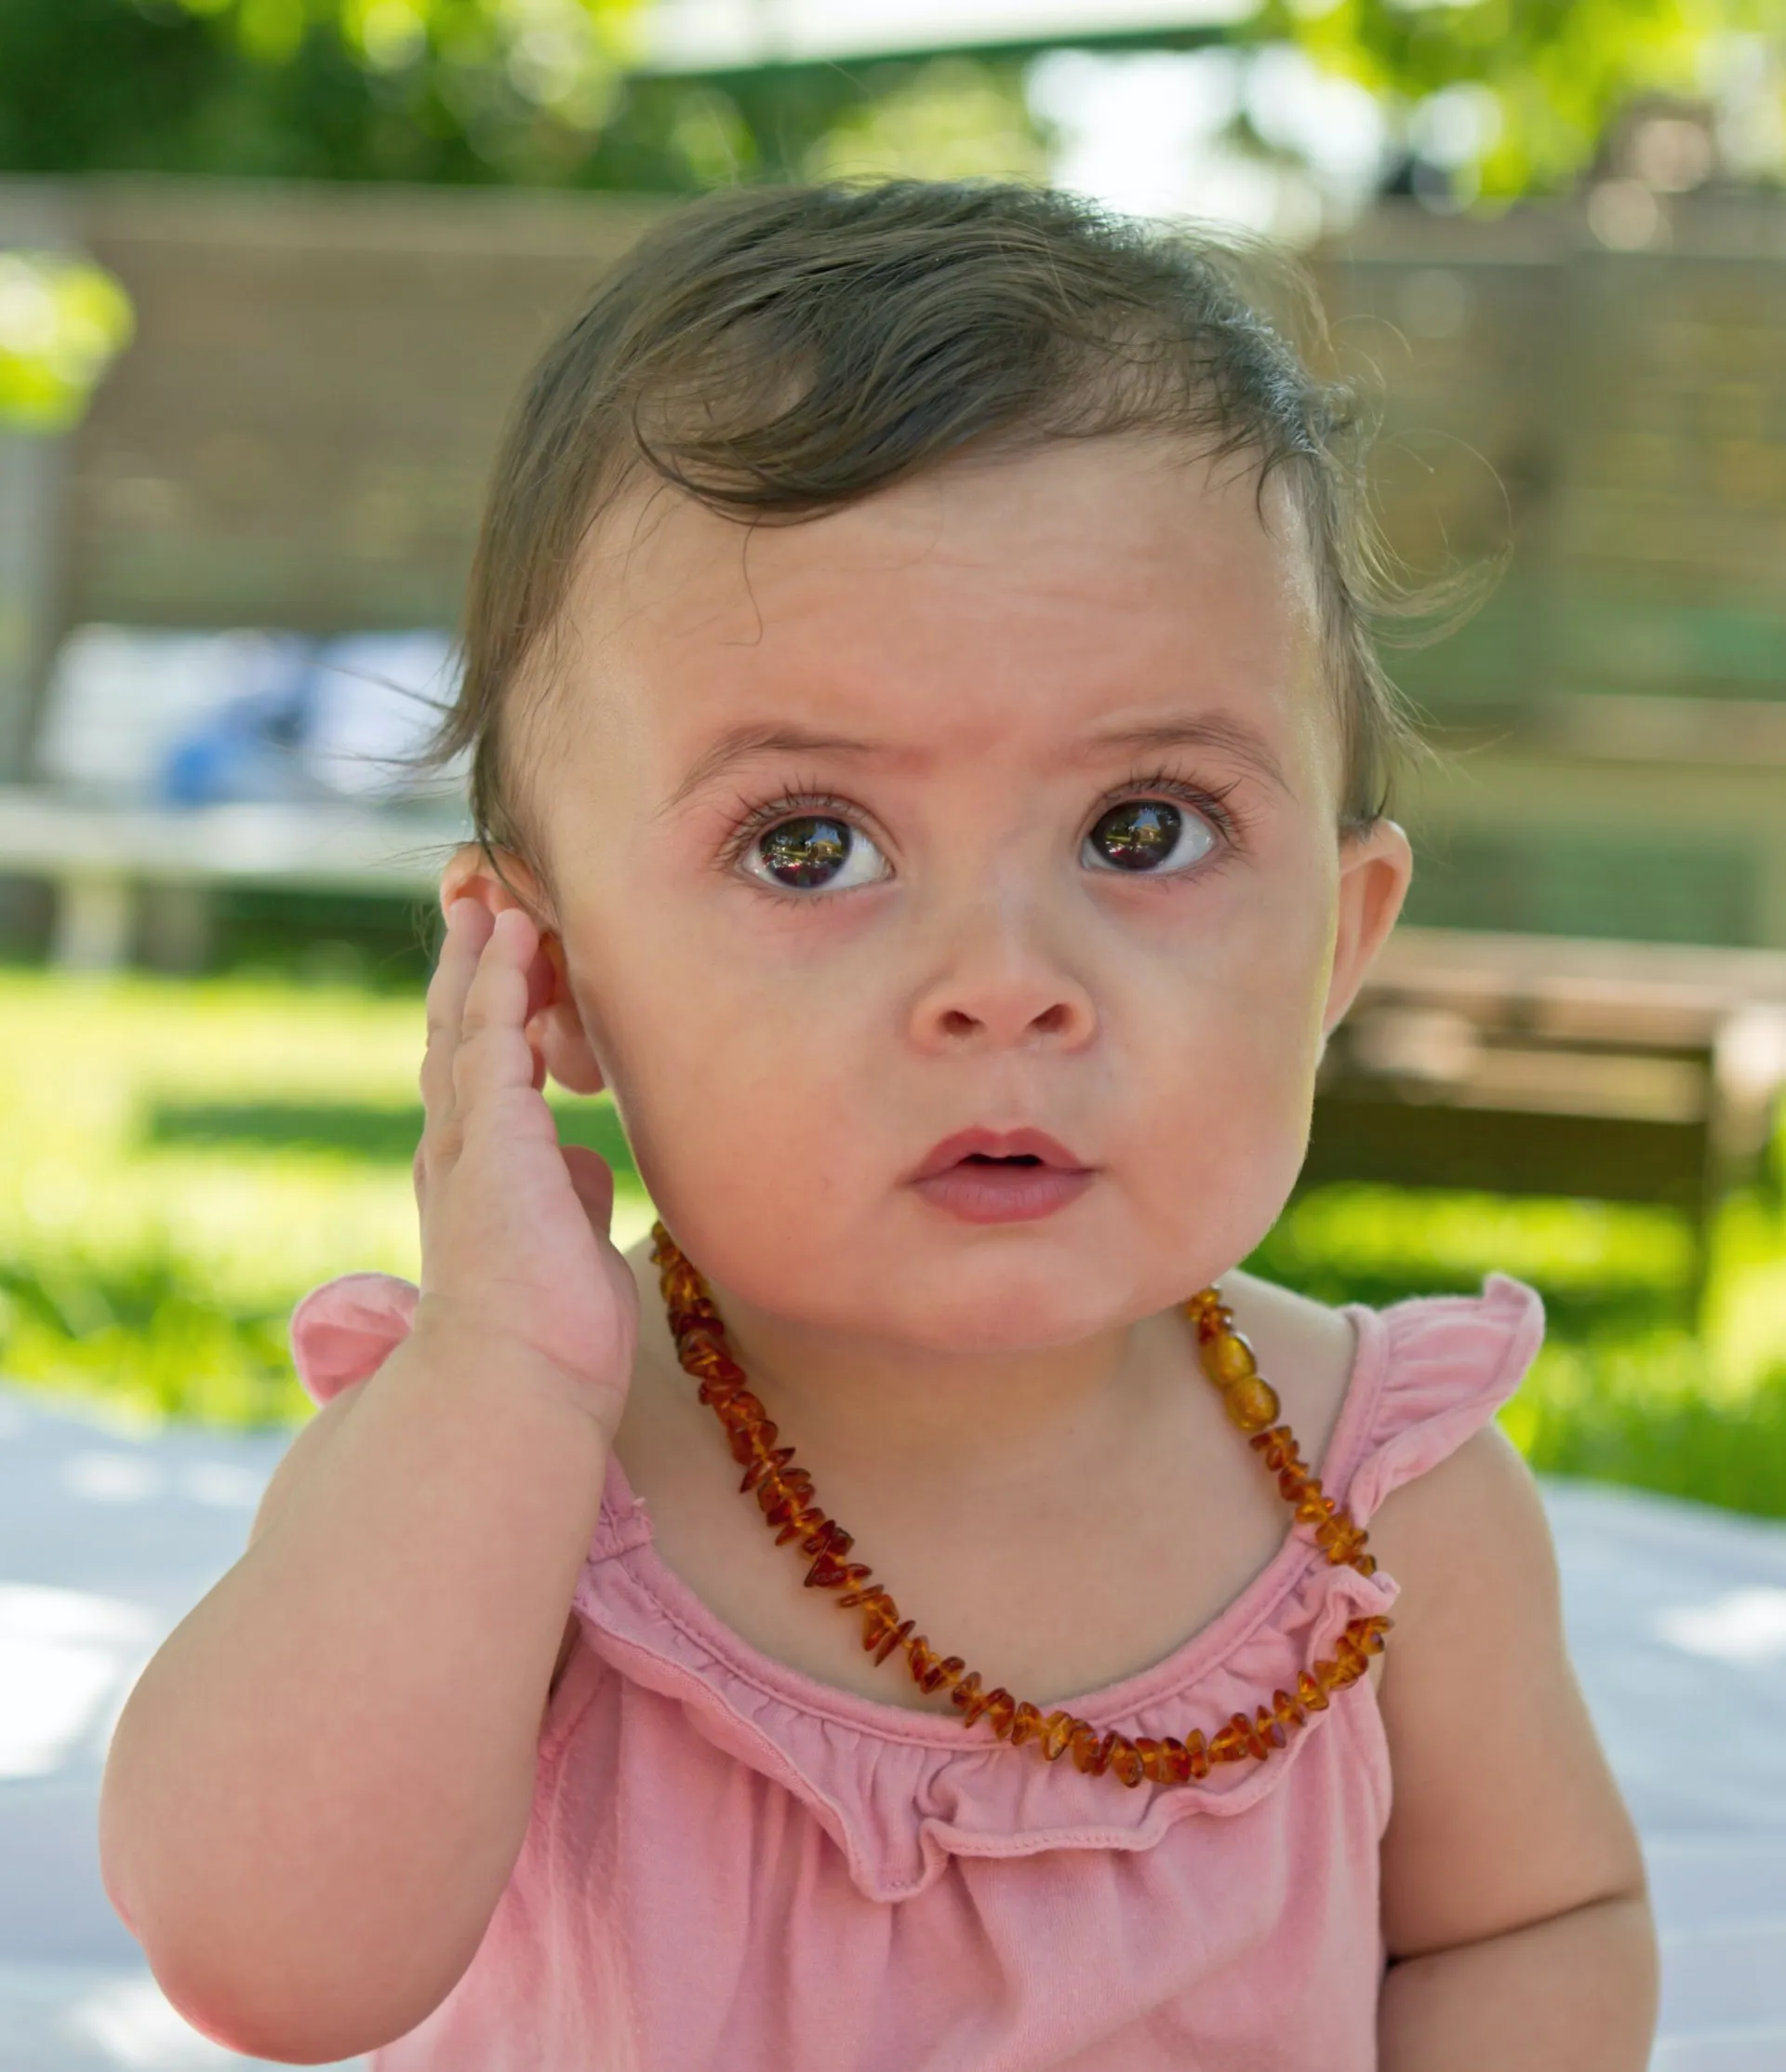 A baby girl wearing an orange necklace and holding her ear.